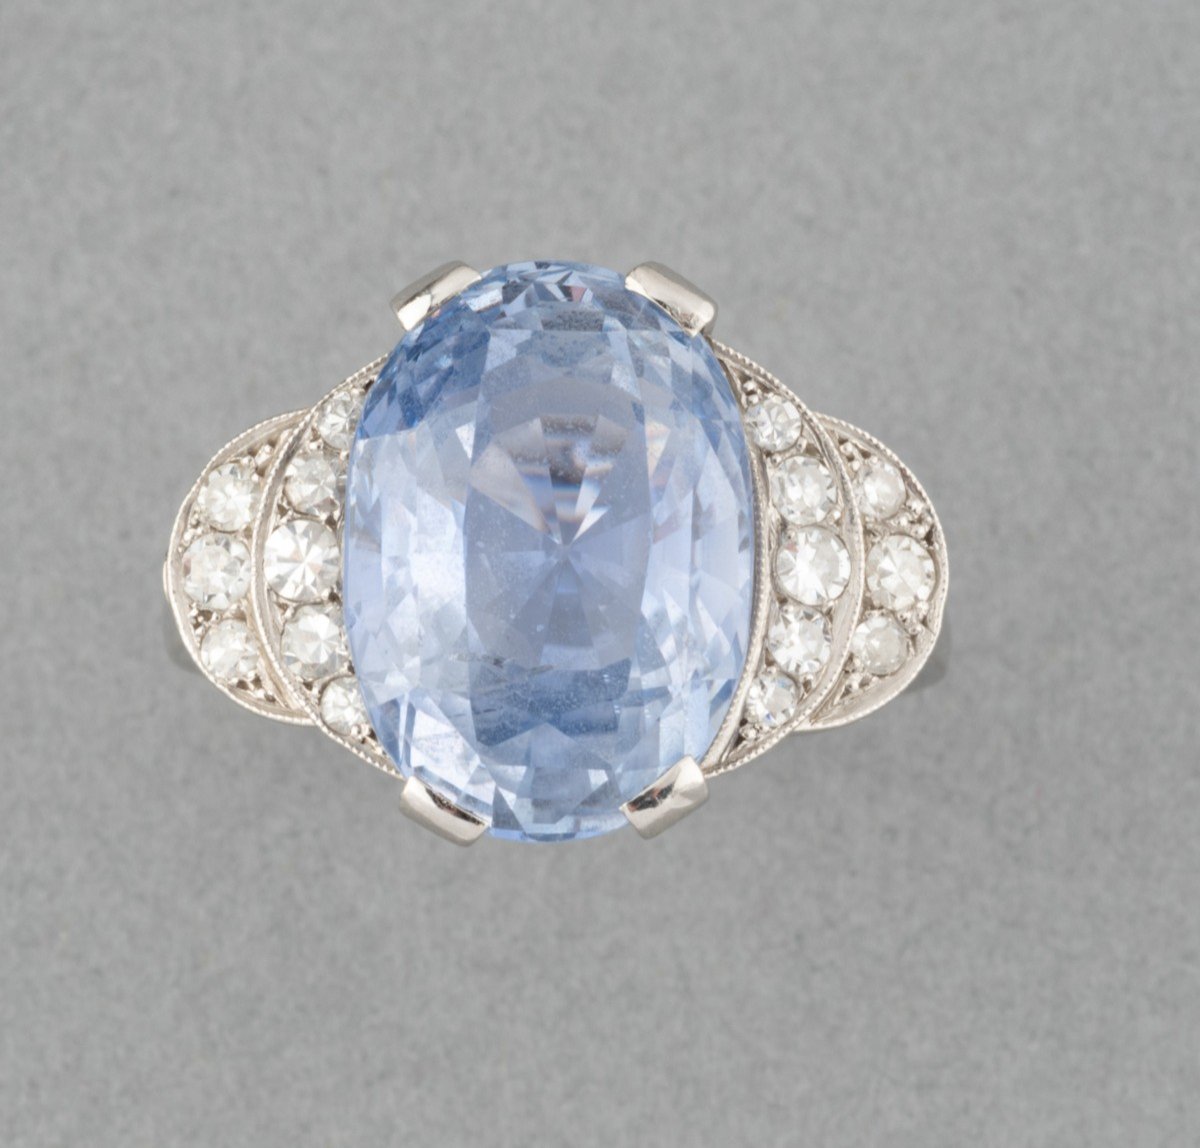 Antique French Platinum Ring With Diamonds And Certified Ceylon Sapphire Of 9.84 Carats